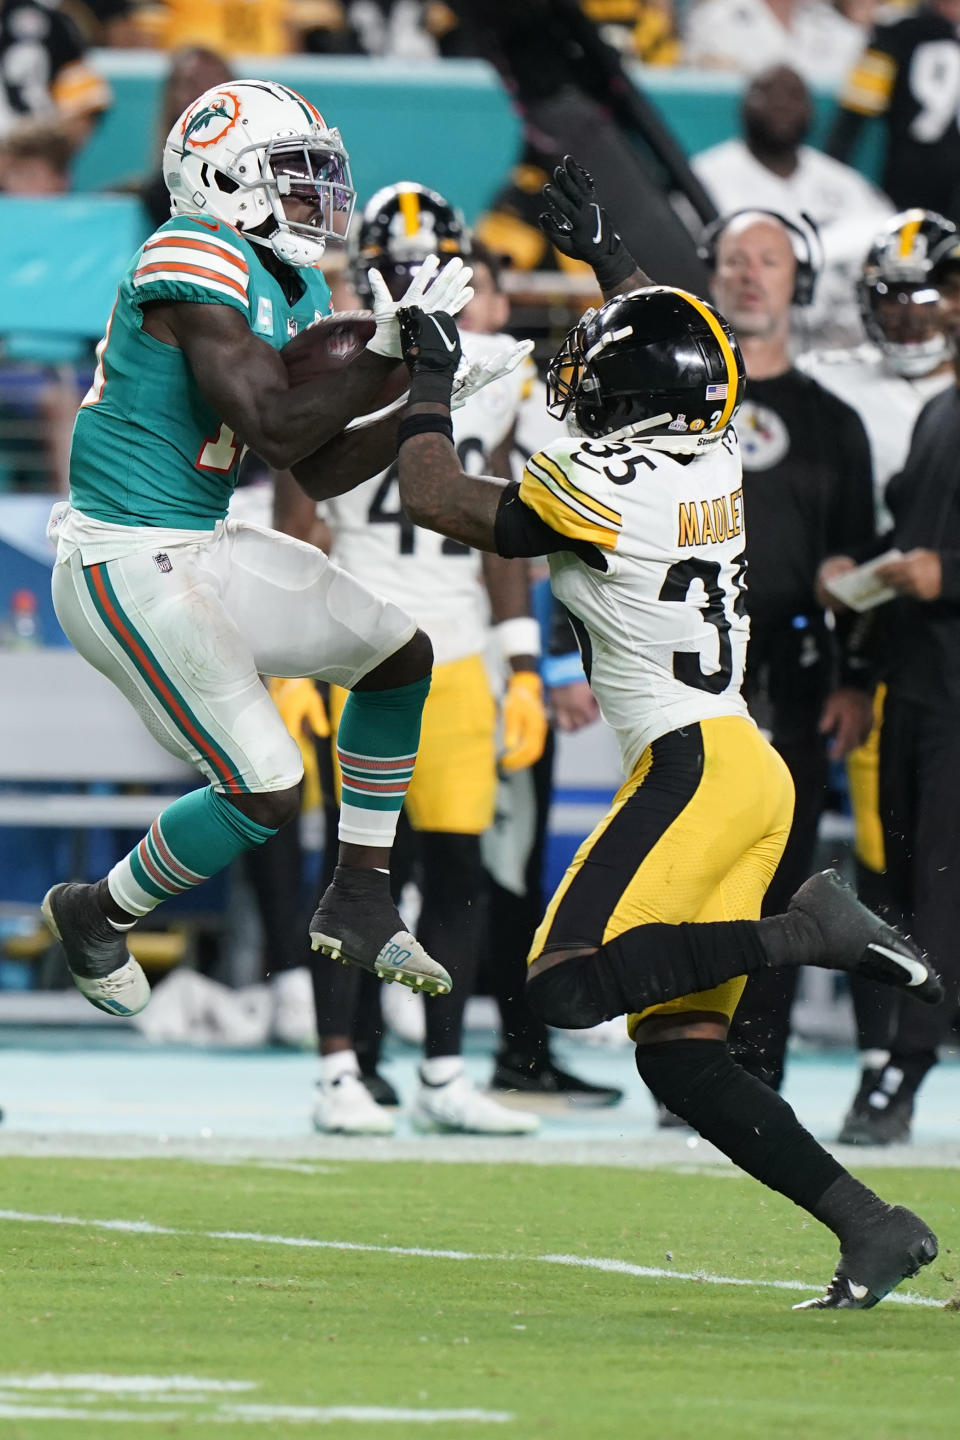 Miami Dolphins wide receiver Tyreek Hill (10) grabs a pass as Pittsburgh Steelers cornerback Arthur Maulet (35) defends during the first half of an NFL football game, Sunday, Oct. 23, 2022, in Miami Gardens, Fla. (AP Photo/Wilfredo Lee )